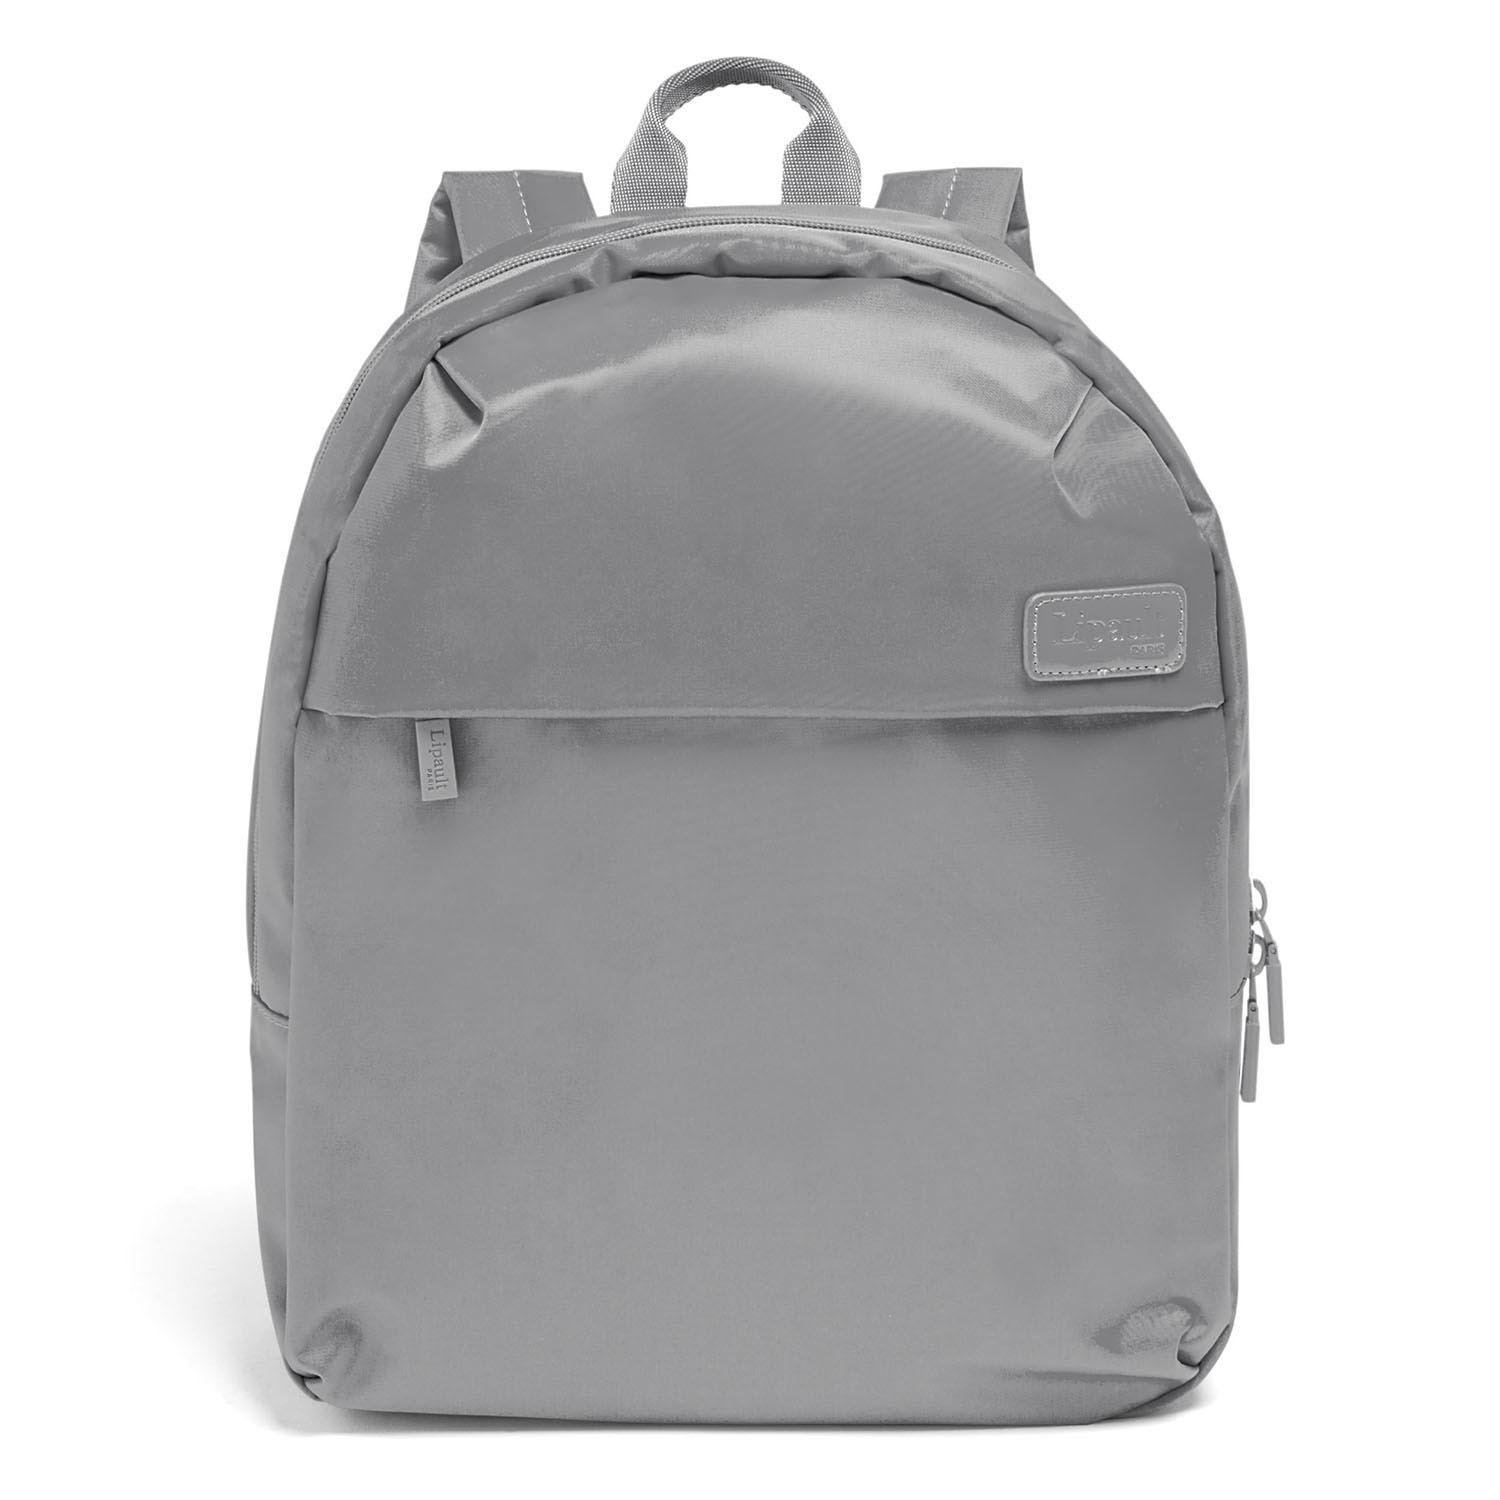 CITY PLUME-BACKPACK M SP61-002-SF000*17